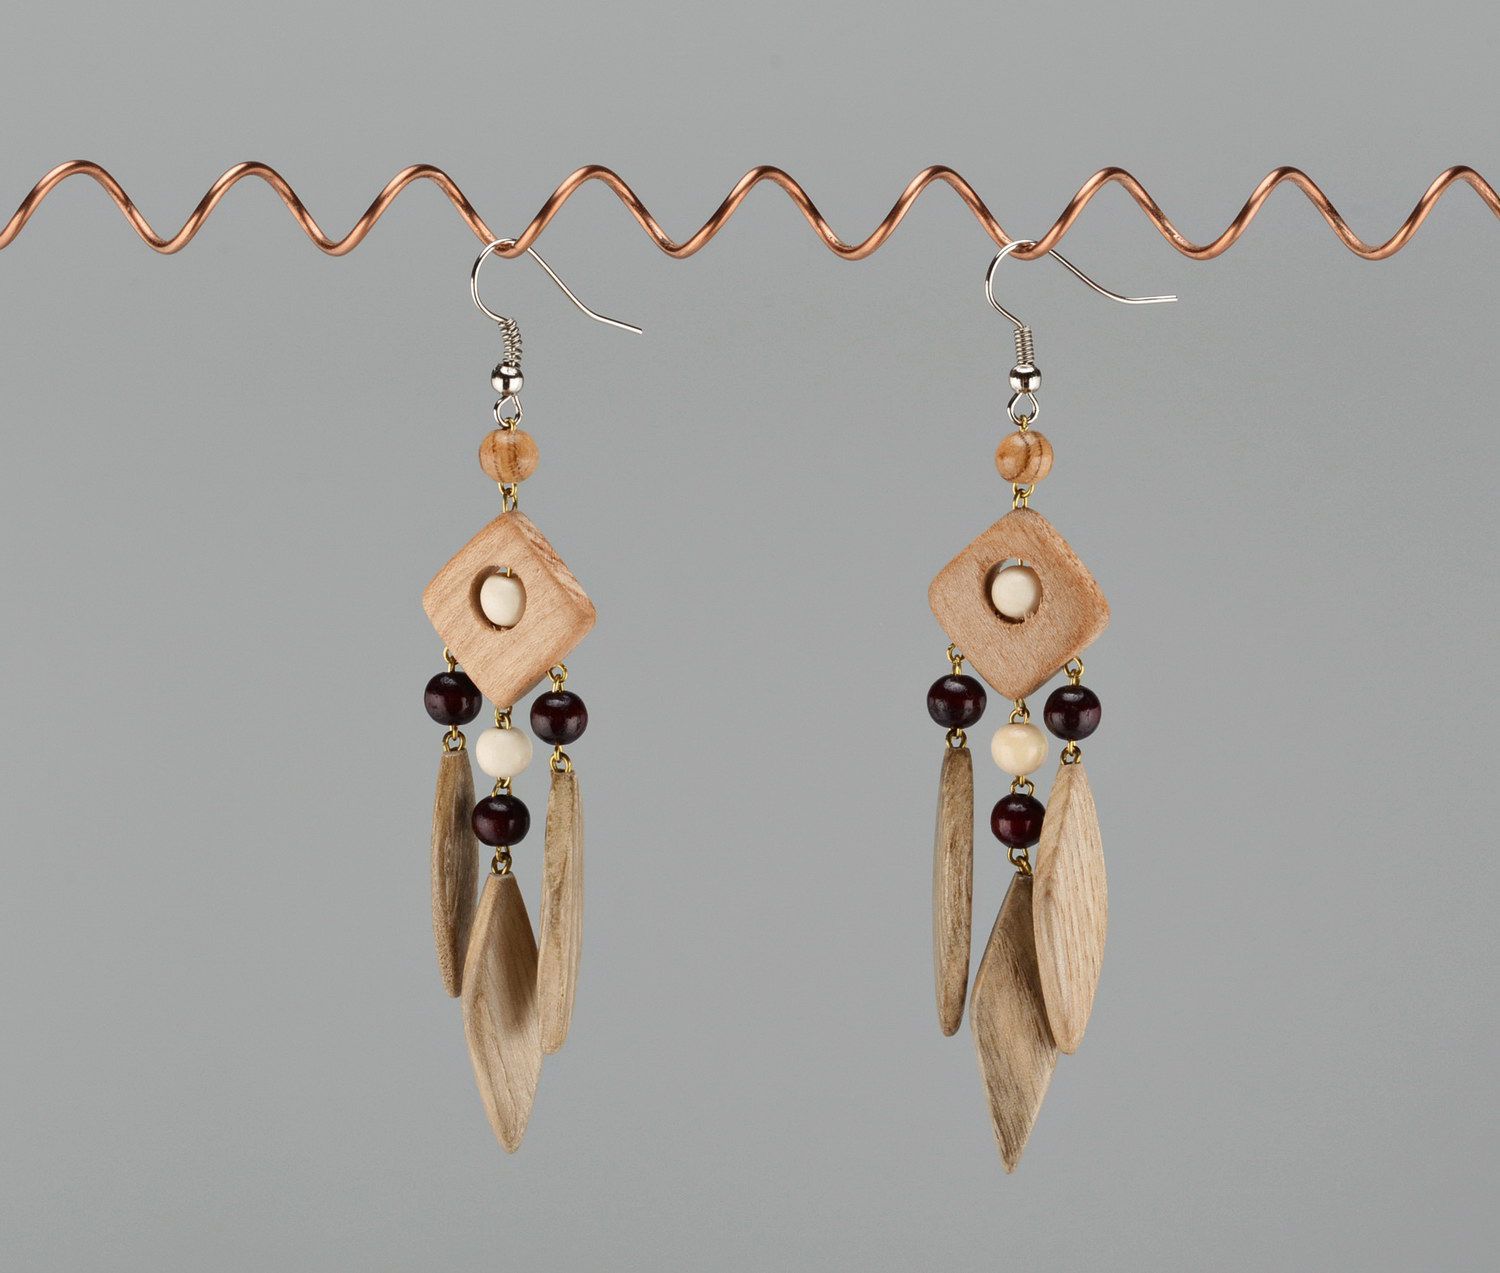 Earrings made of different wood species photo 3